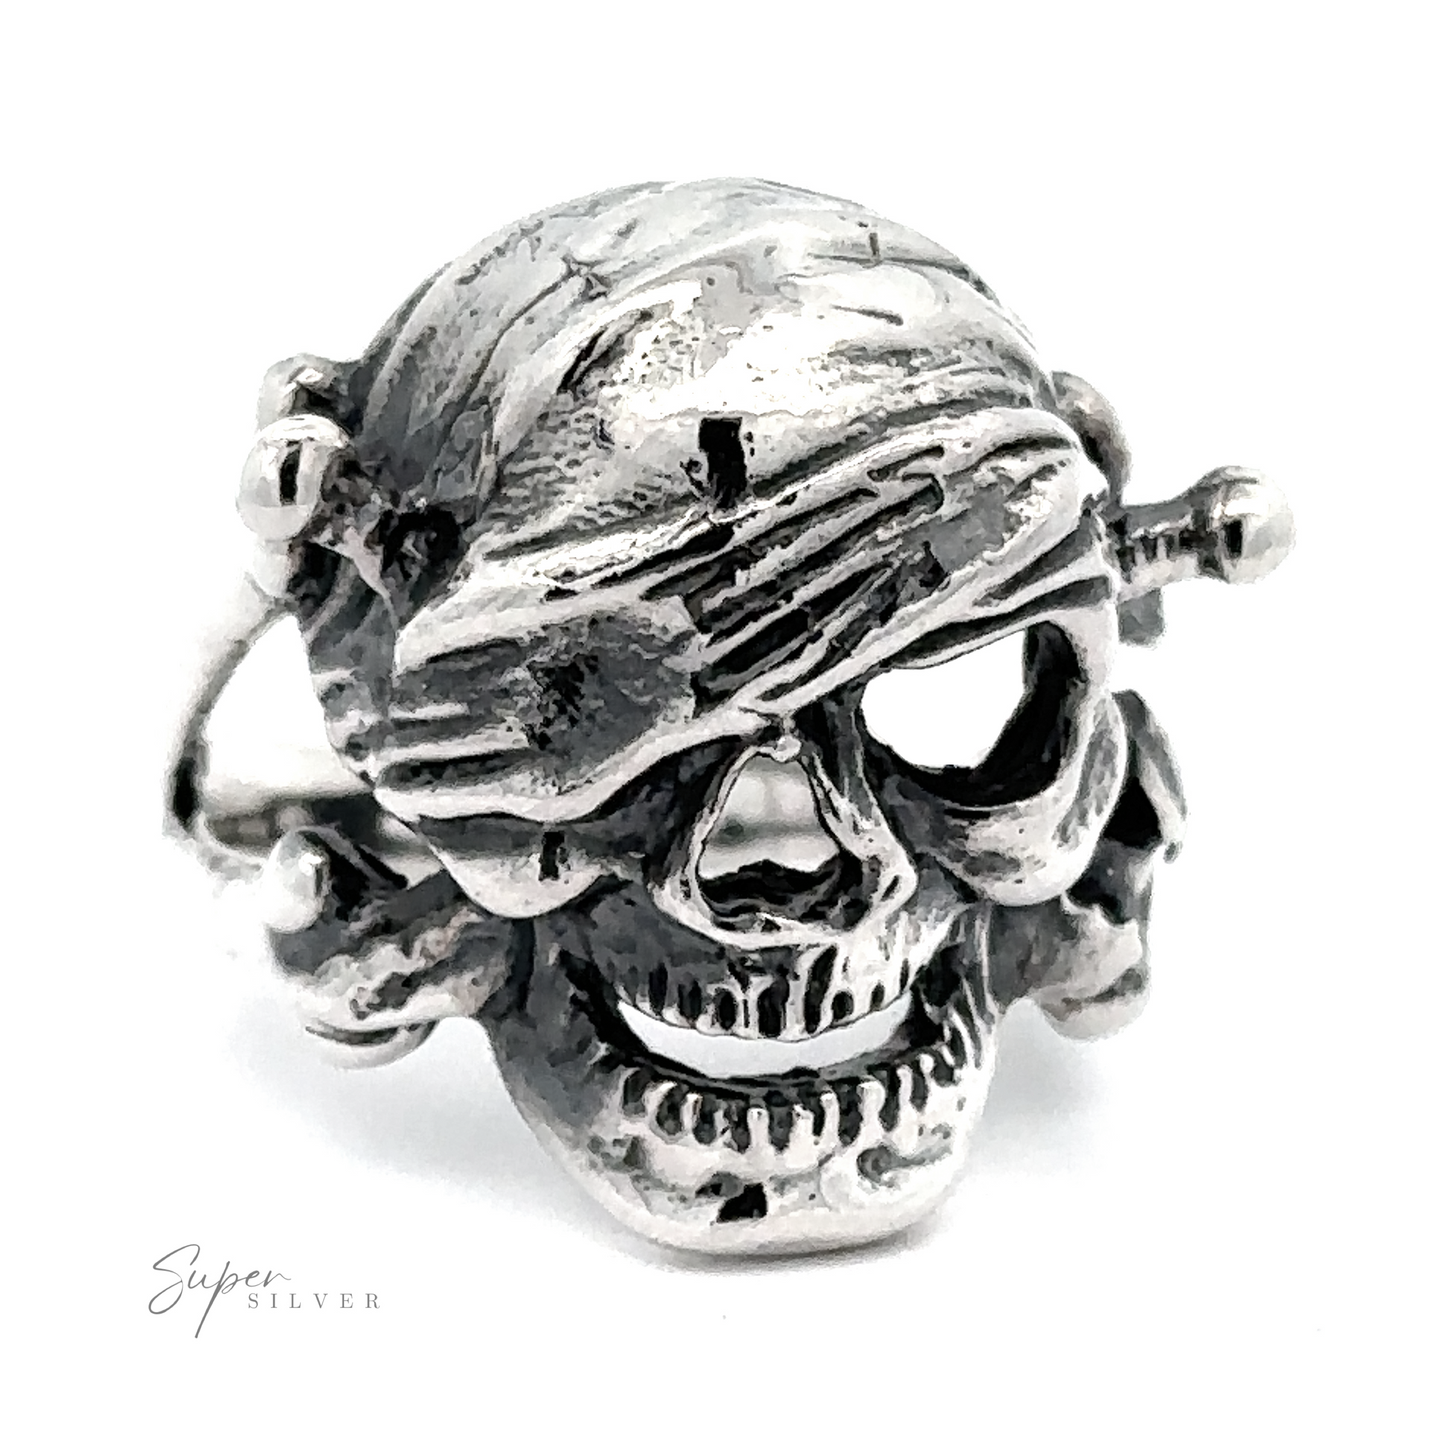 A Large Pirate Skull And Crossbones Ring with detailed carvings and a bandana, displayed on a white background.